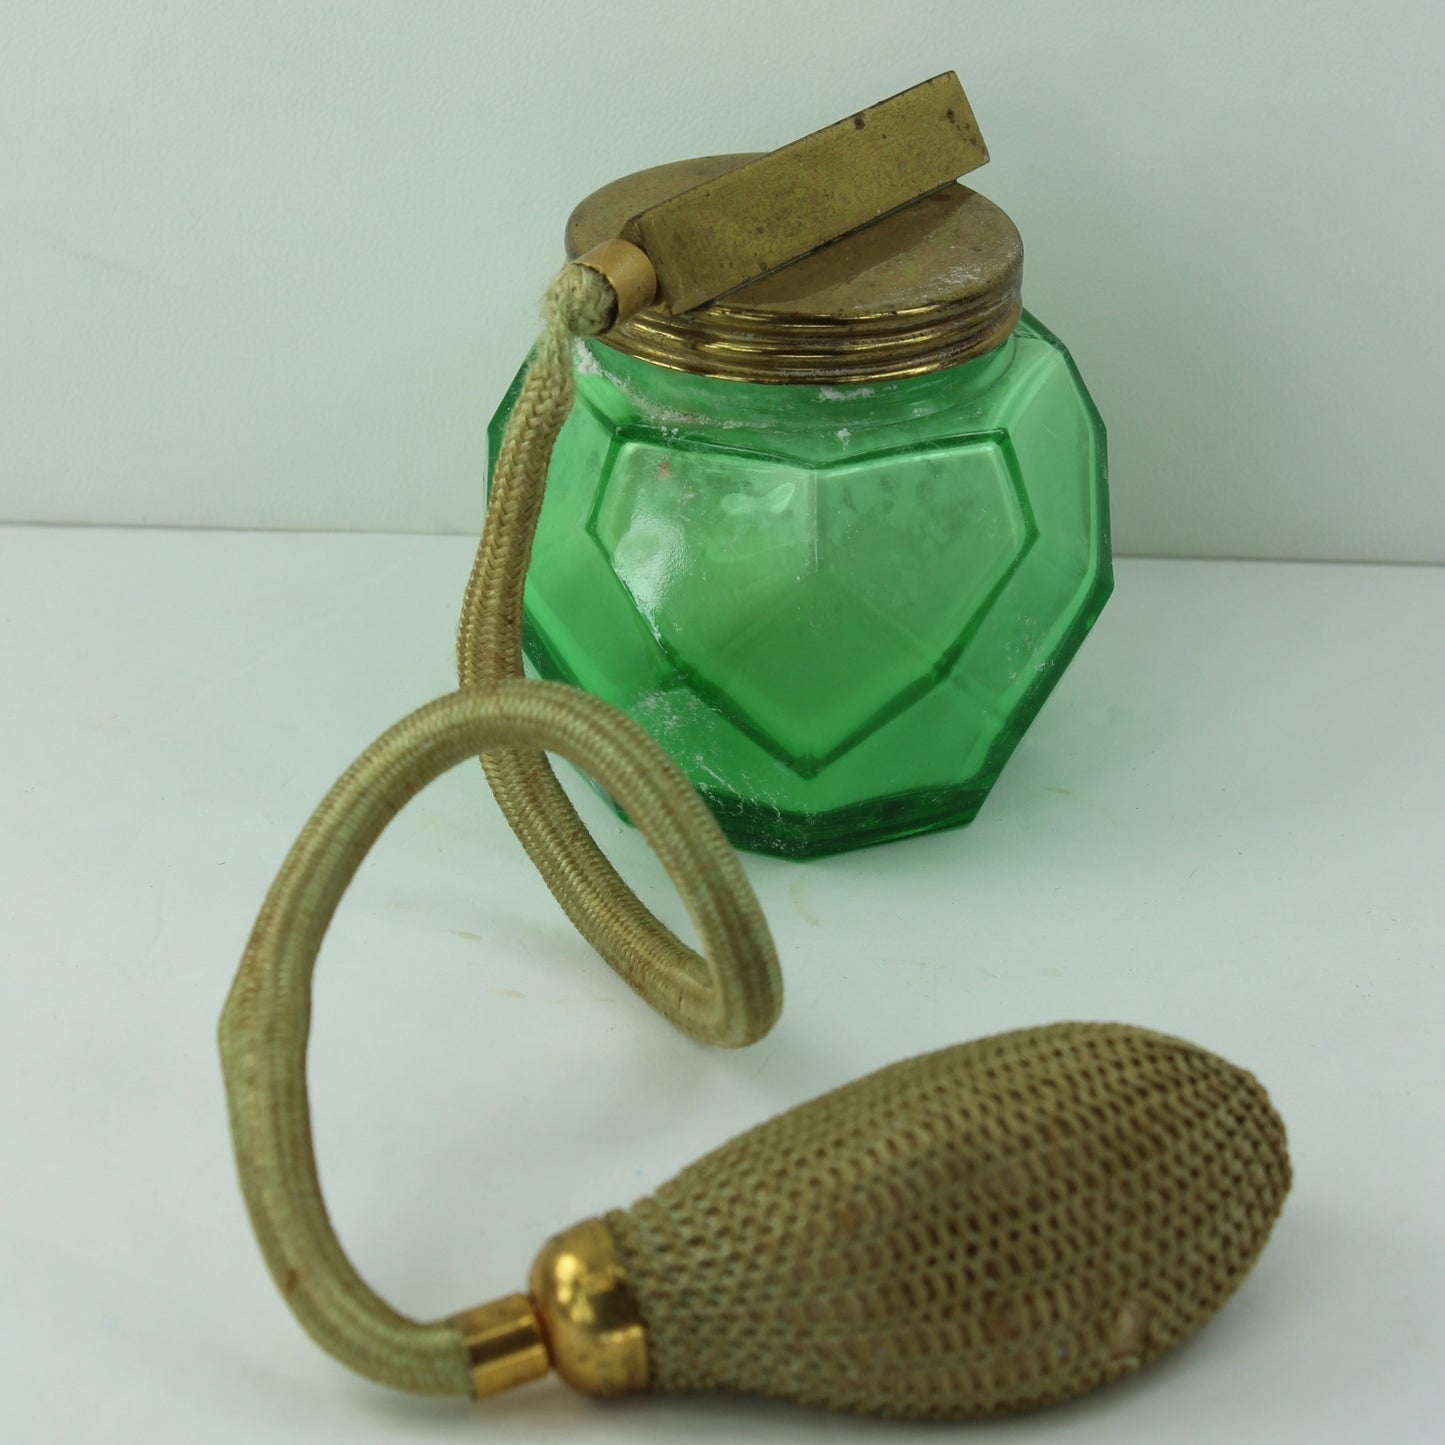 Extremely Rare Antique 1930s Volupte Spray Body Powder Atomizer Green Glass Powder Filled puffer ball included